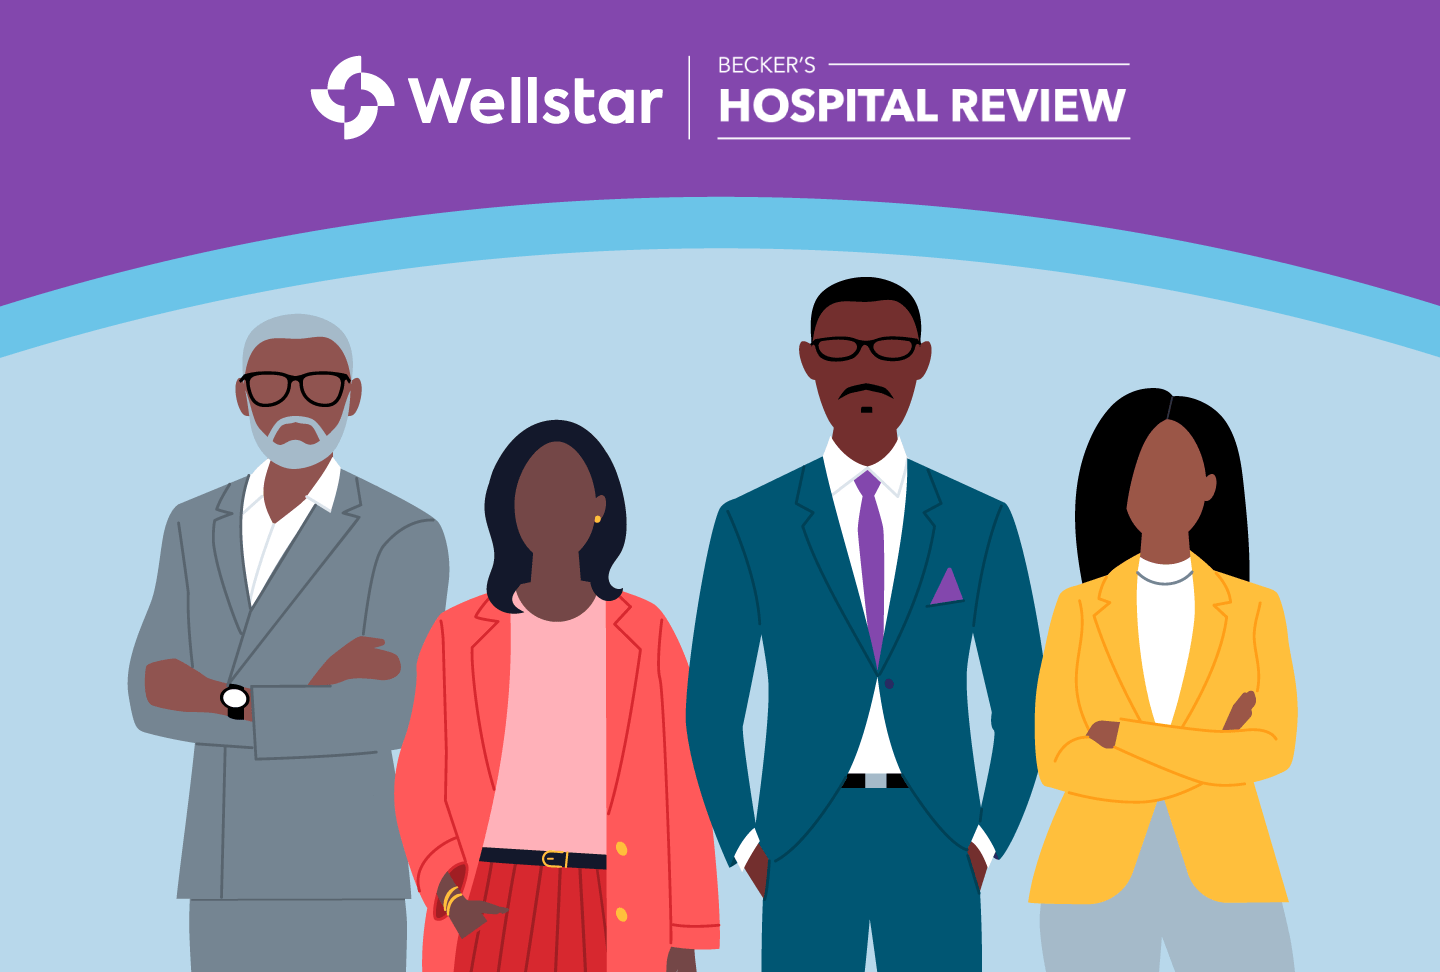 Illustration of group of people. Wellstar and Becker's Hospital Review logos.